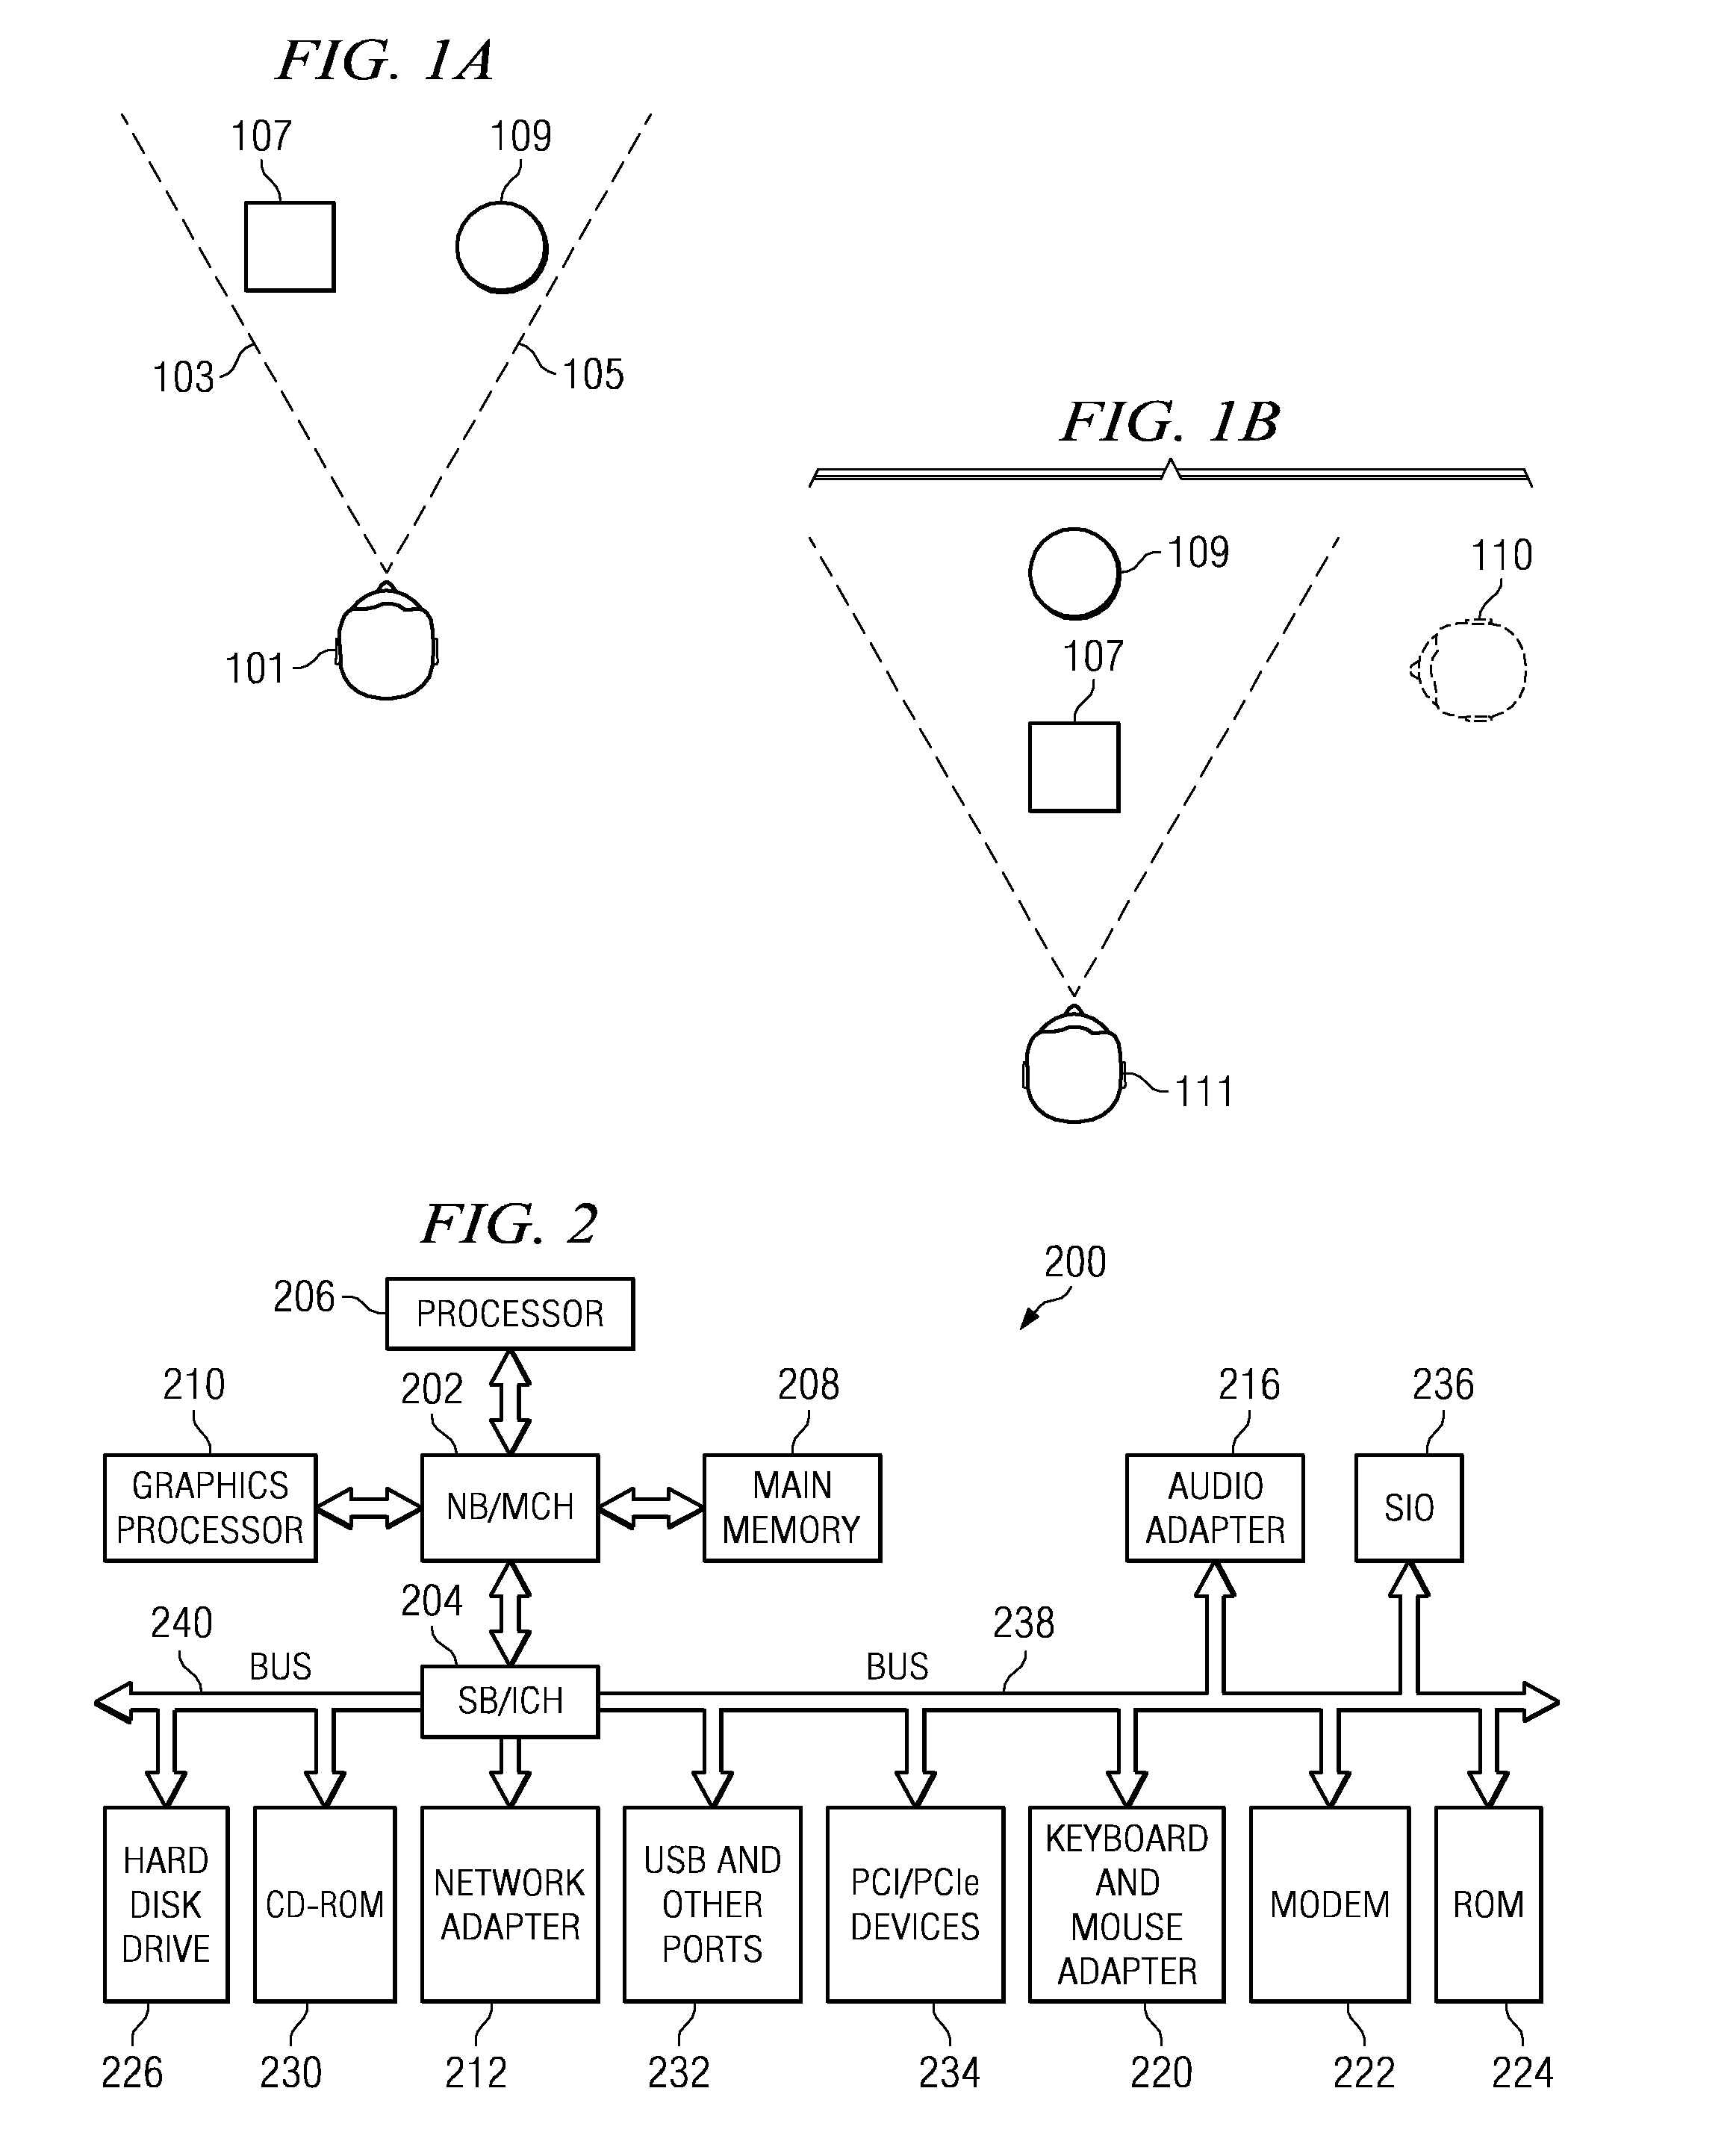 Method and apparatus for spawning projected avatars in a virtual universe